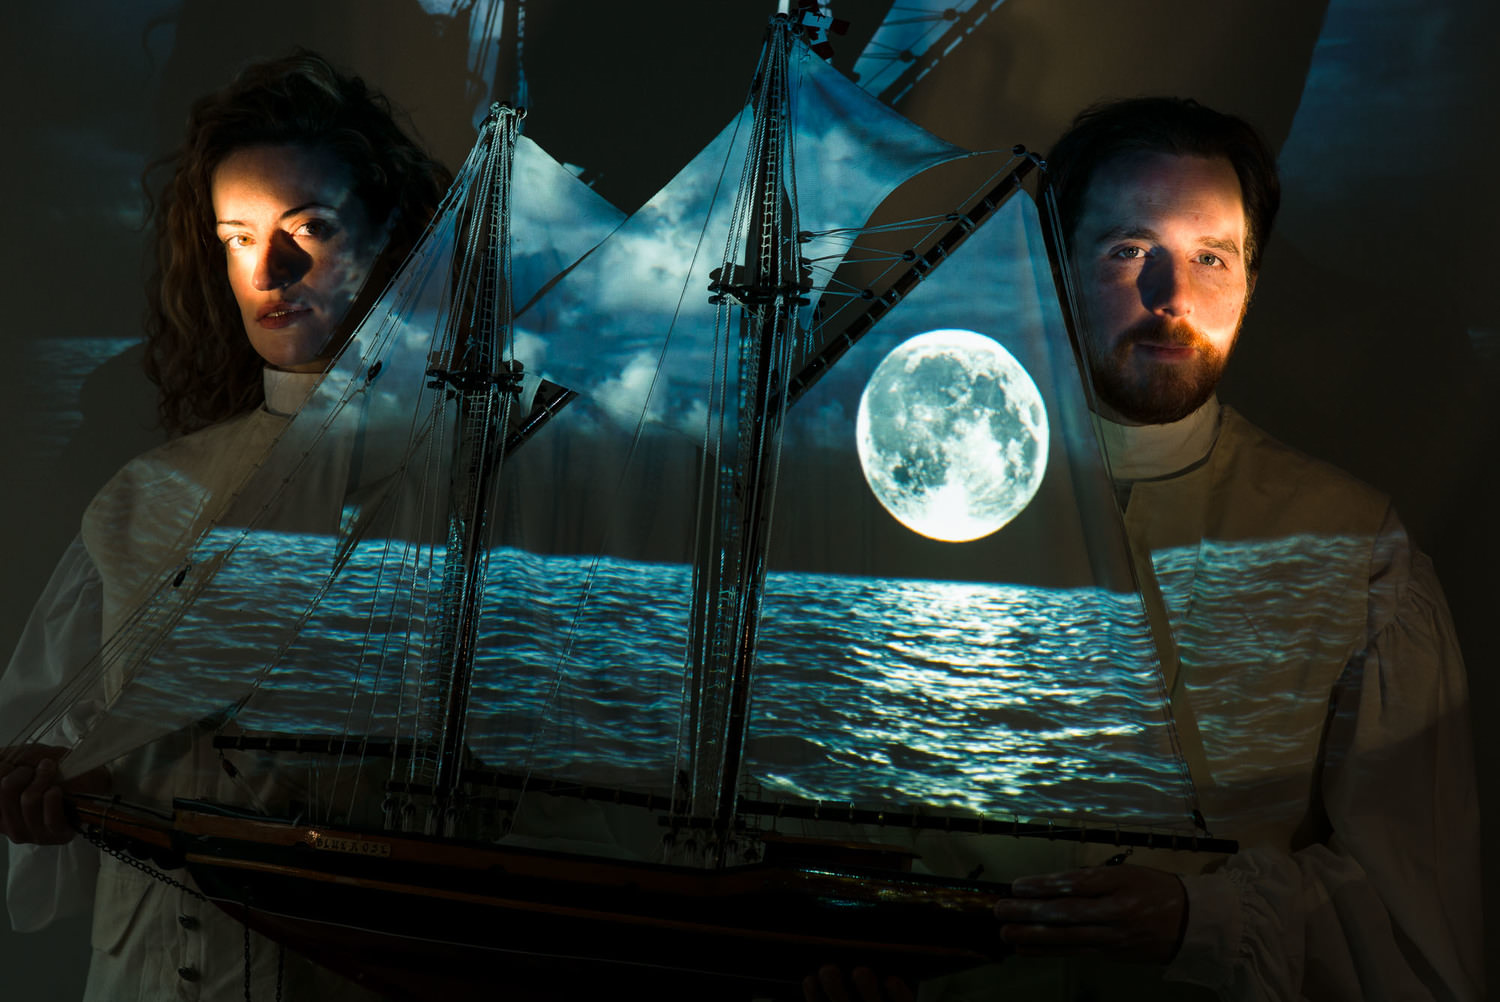 Katie Proulx and Glenn Provost in theatre KAPOW's Shipwrecked! An Entertainment, February 22 - March 2 at the Derry Opera House. .http://www.tkapow.com/. Photo by Matthew Lomanno.